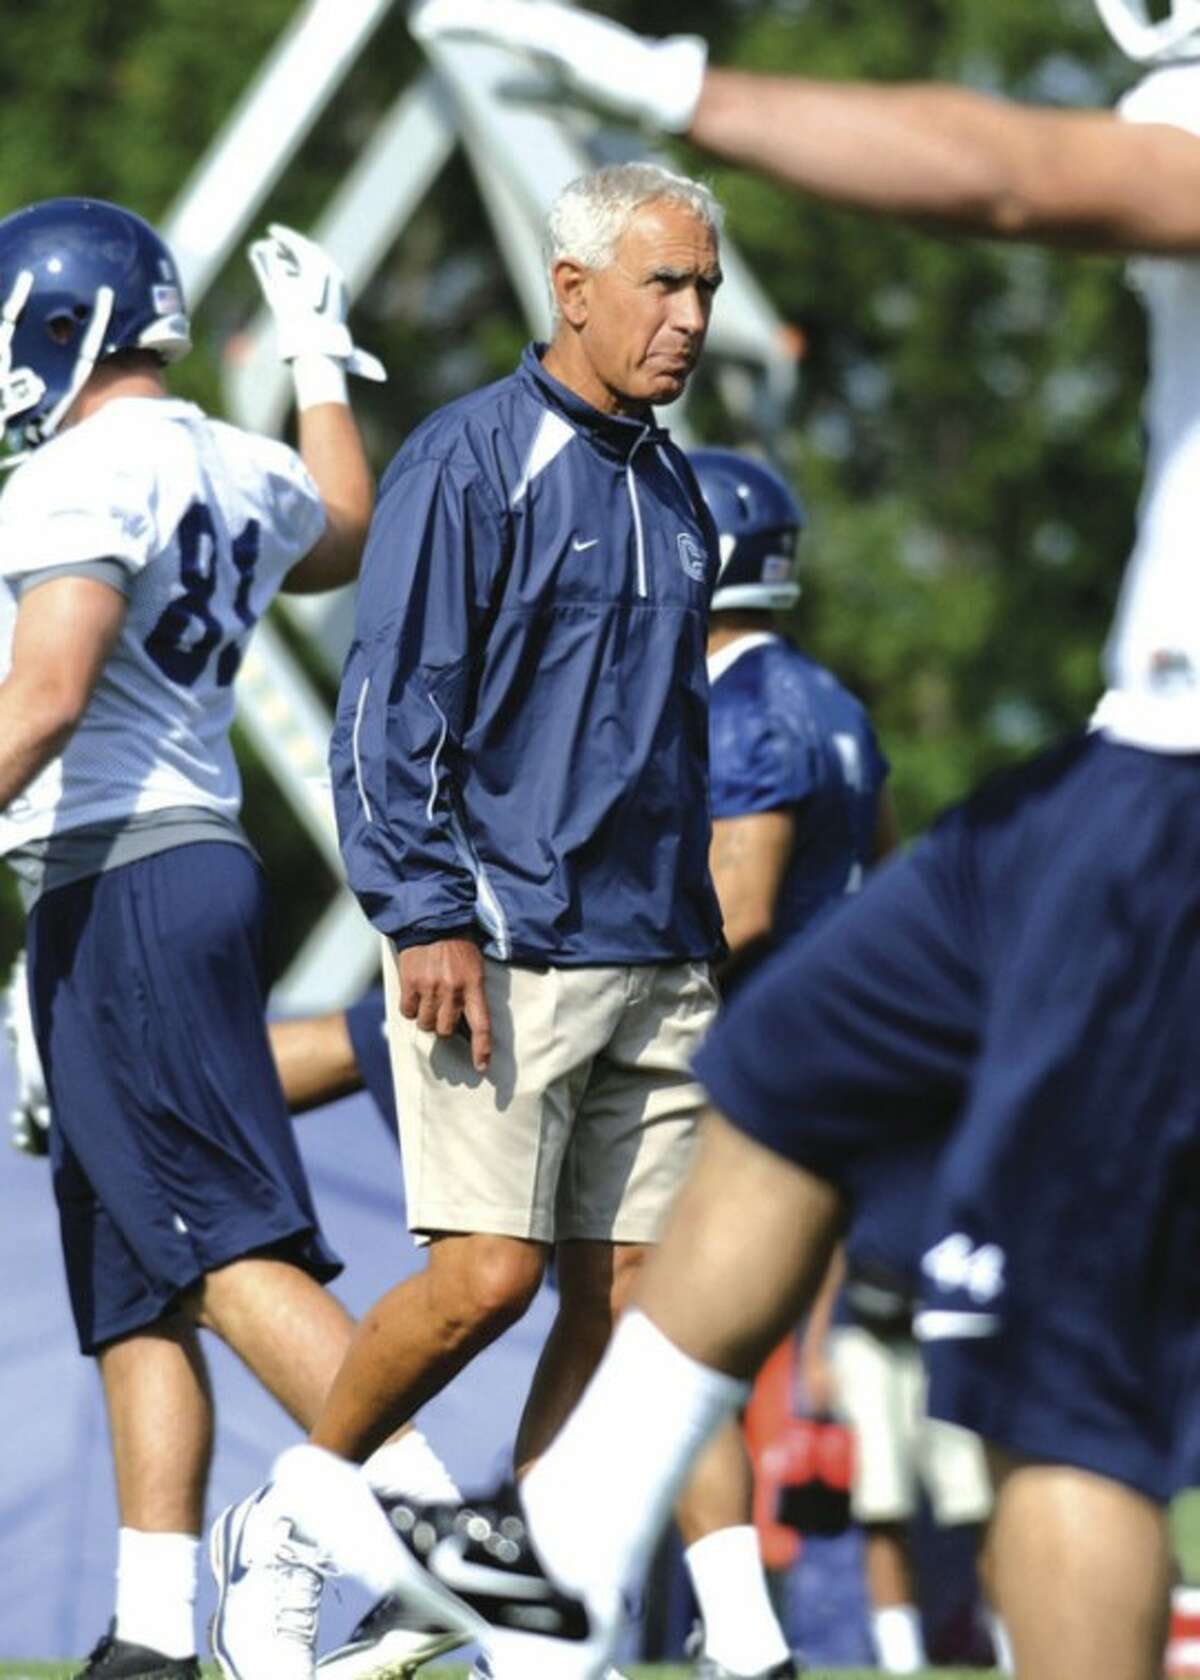 @White=[C] AP photo New UConn coach Paul Pasqualoni walks among his players during a recent practice. The Huskies not only have a new coach, but their offensive backfield is basically an all-new unit.